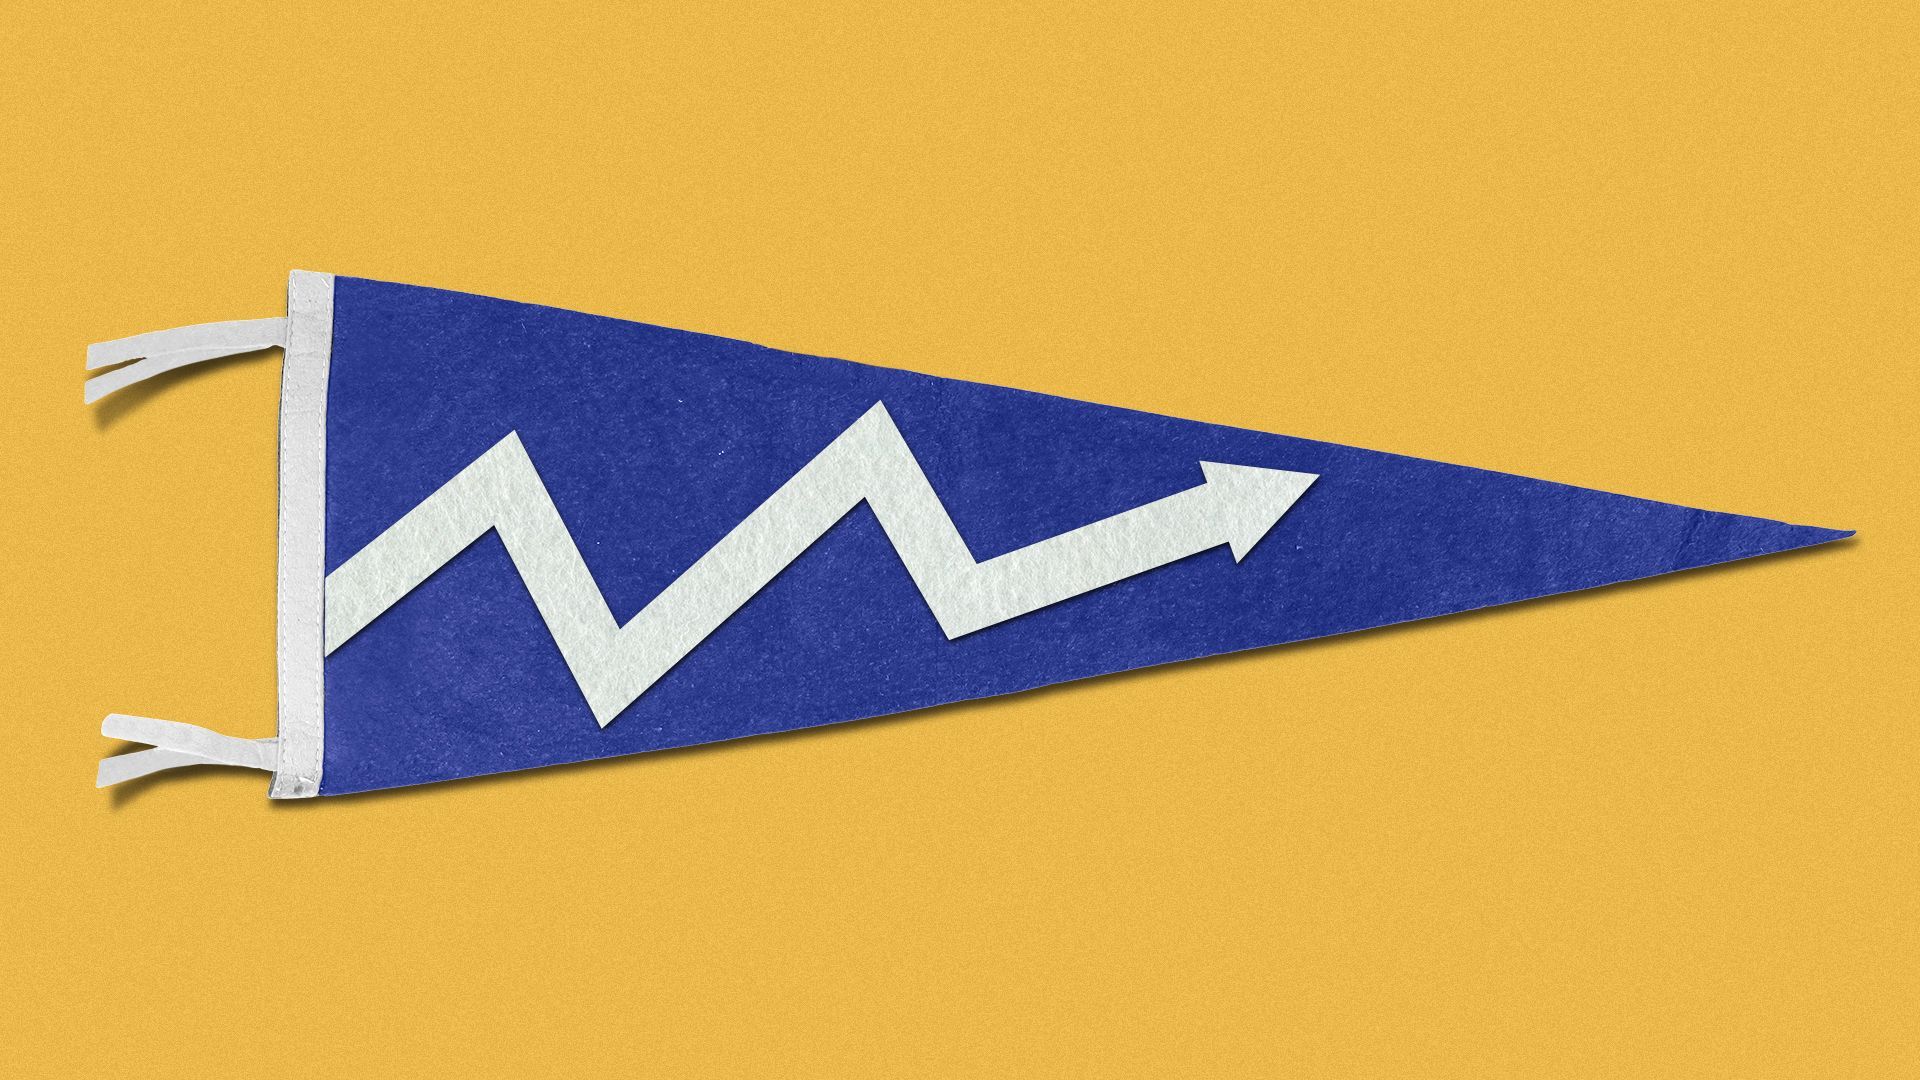 Illustration of a line chart on a college pennant.